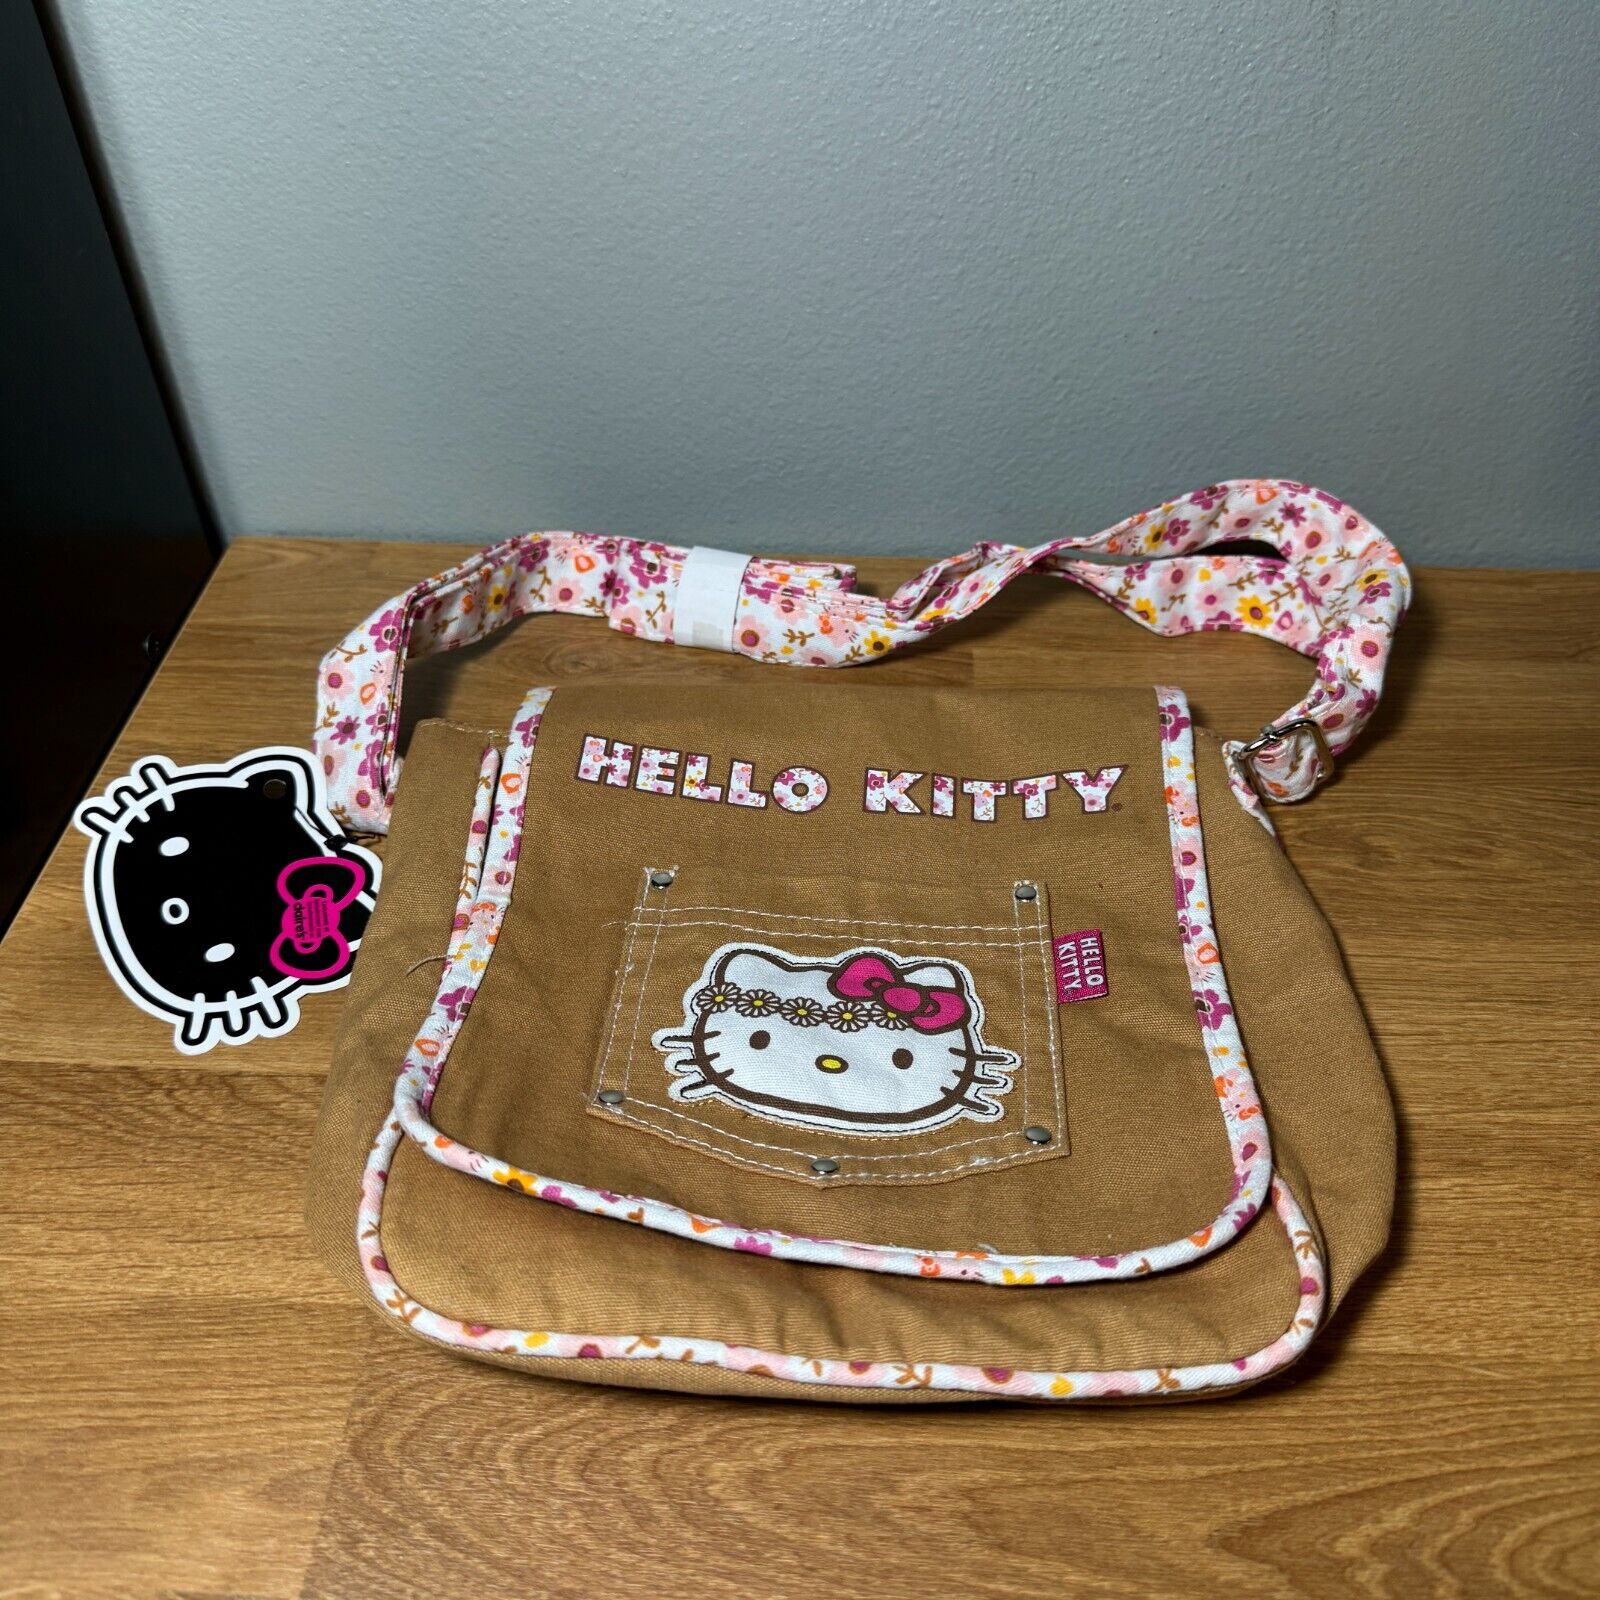 Sanrio Claires Hello Kitty Flower Brown Crossbody Bag Purse Loungefly NWT 2014